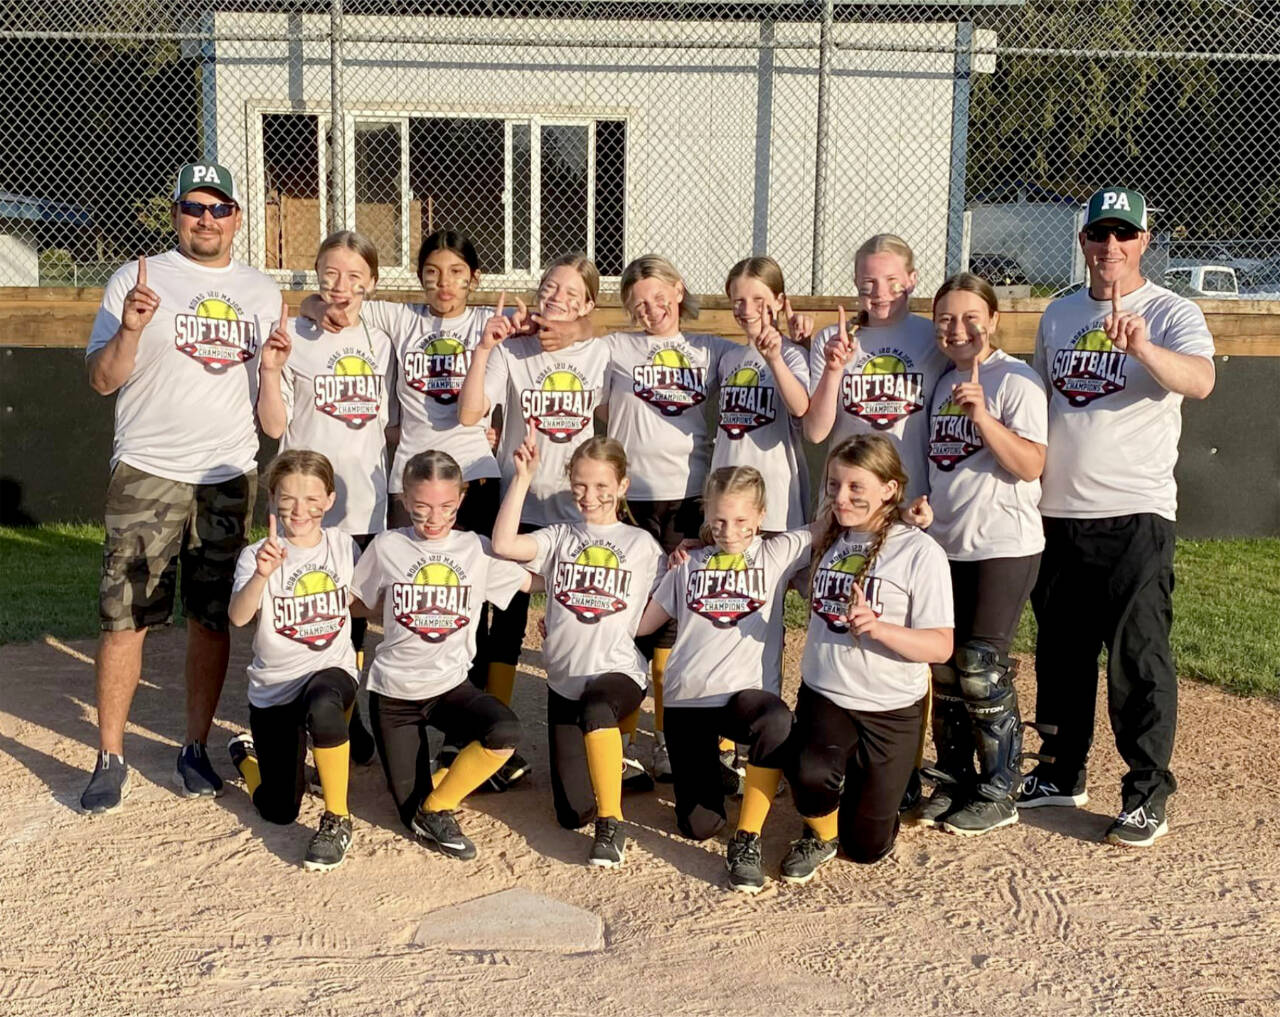 The PA Power 12U softball team won the Port Angeles city championship this weekend. The players are, from left, back row, Madison Smith, Elvira Wheeler, Lilly Lancaster, Allison Leitz, Chloe Underwood, Mariah Traband and Makenzie Smith. From left, front row, are Ashlyn Gray, Dallas Traband, Della Holland, Morgan Smith and Chloe Beck.